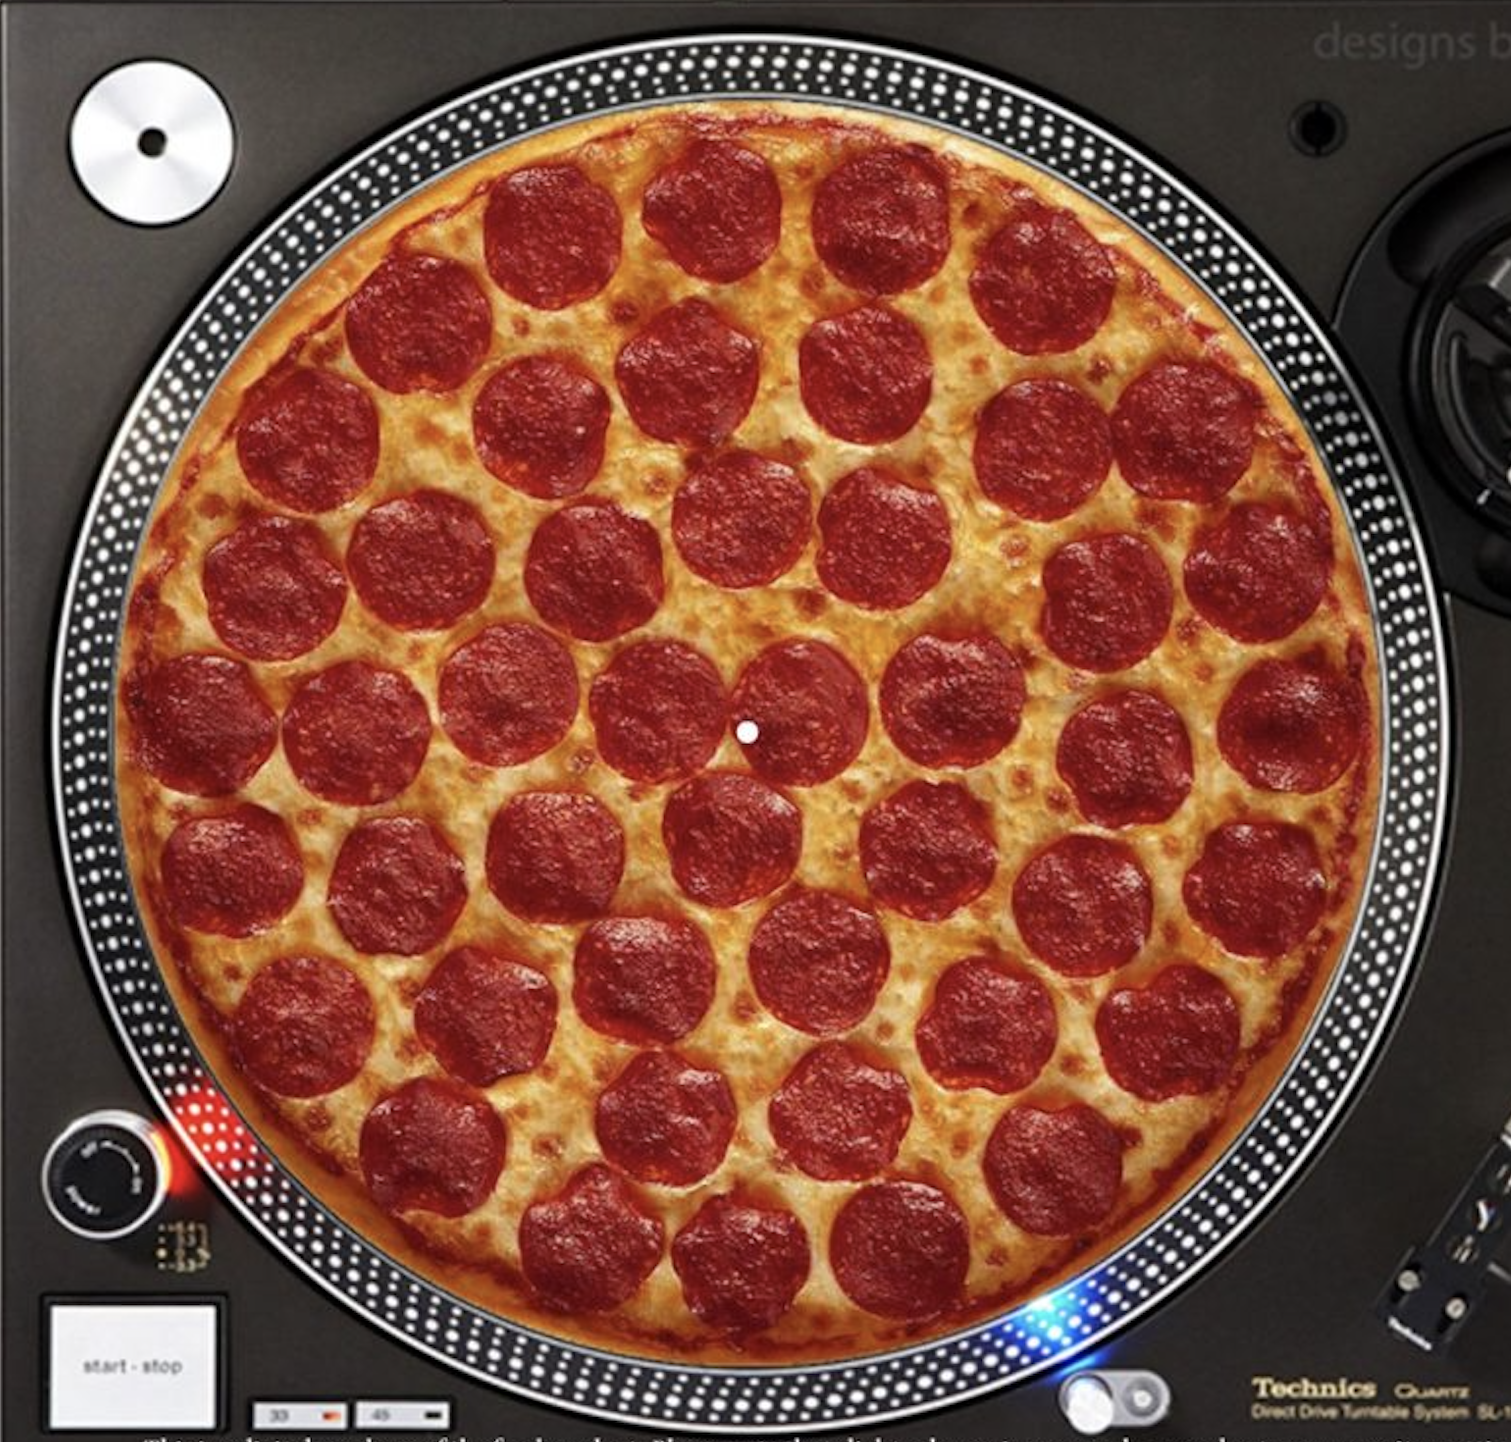 Check Out These Weird Looking Slipmats!